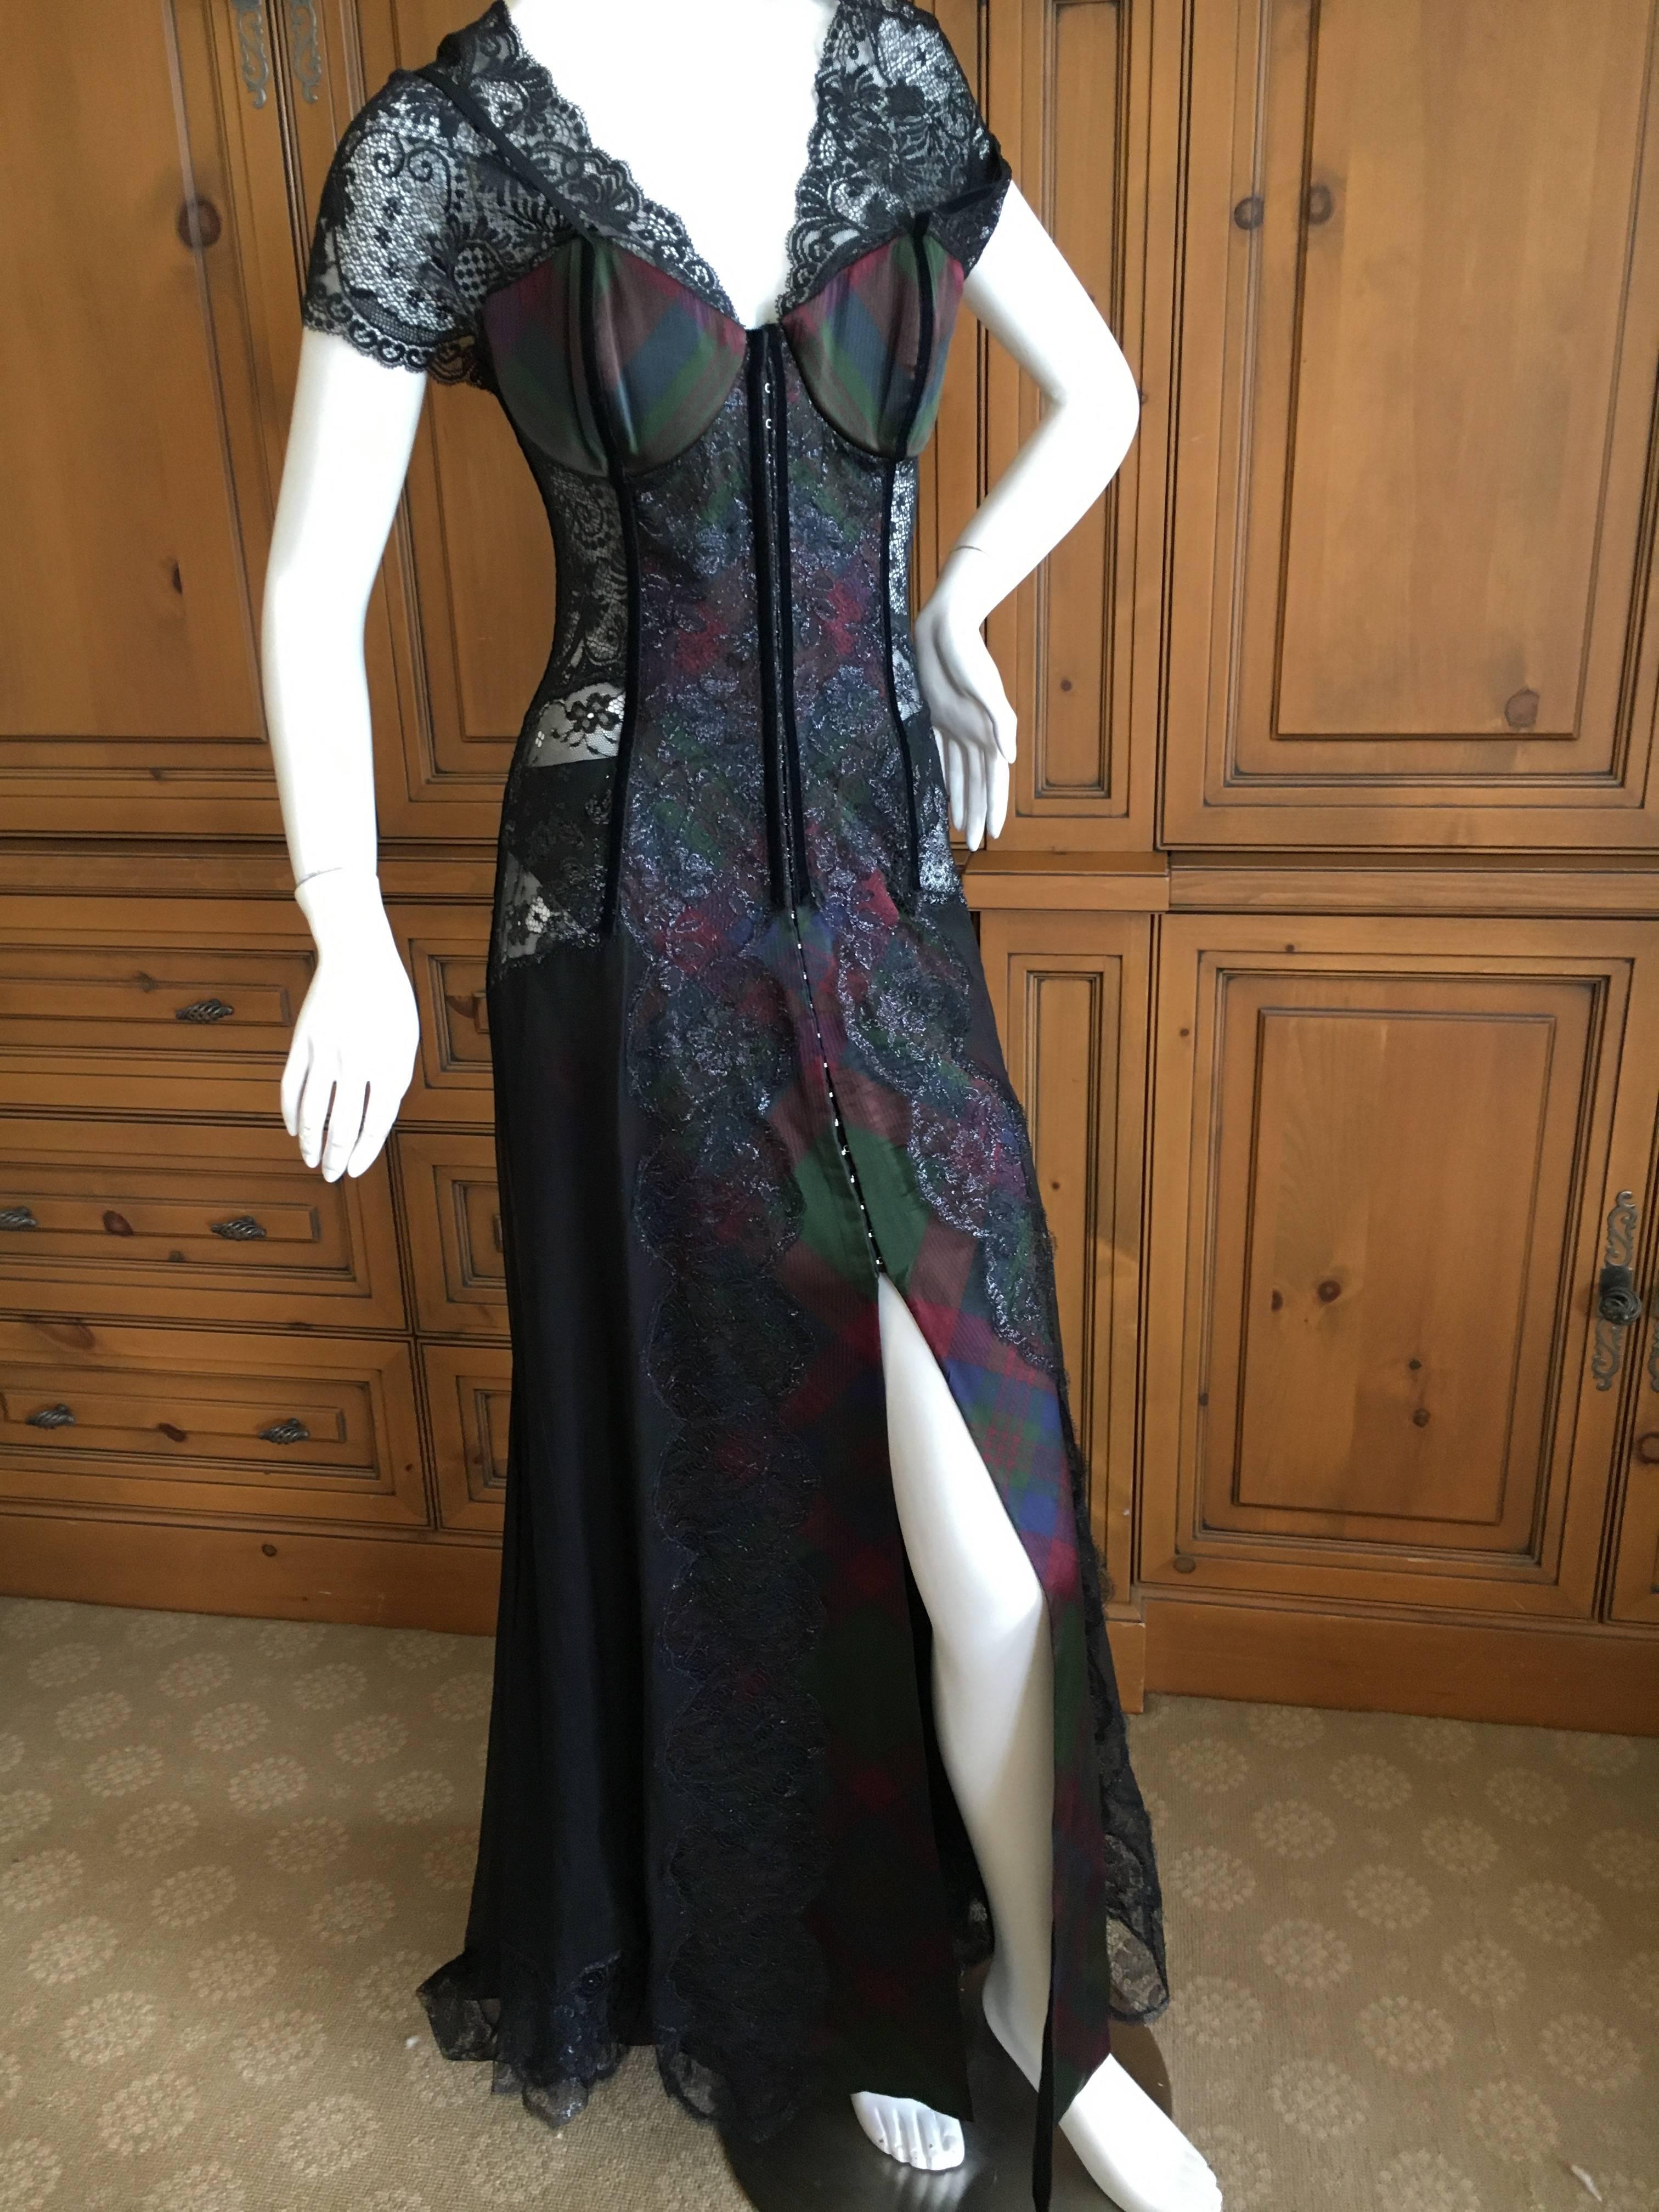 Christian Dior Gianfranco Ferre Final Collection Plaid Lace Evening Dress, 1996  In Excellent Condition For Sale In Cloverdale, CA